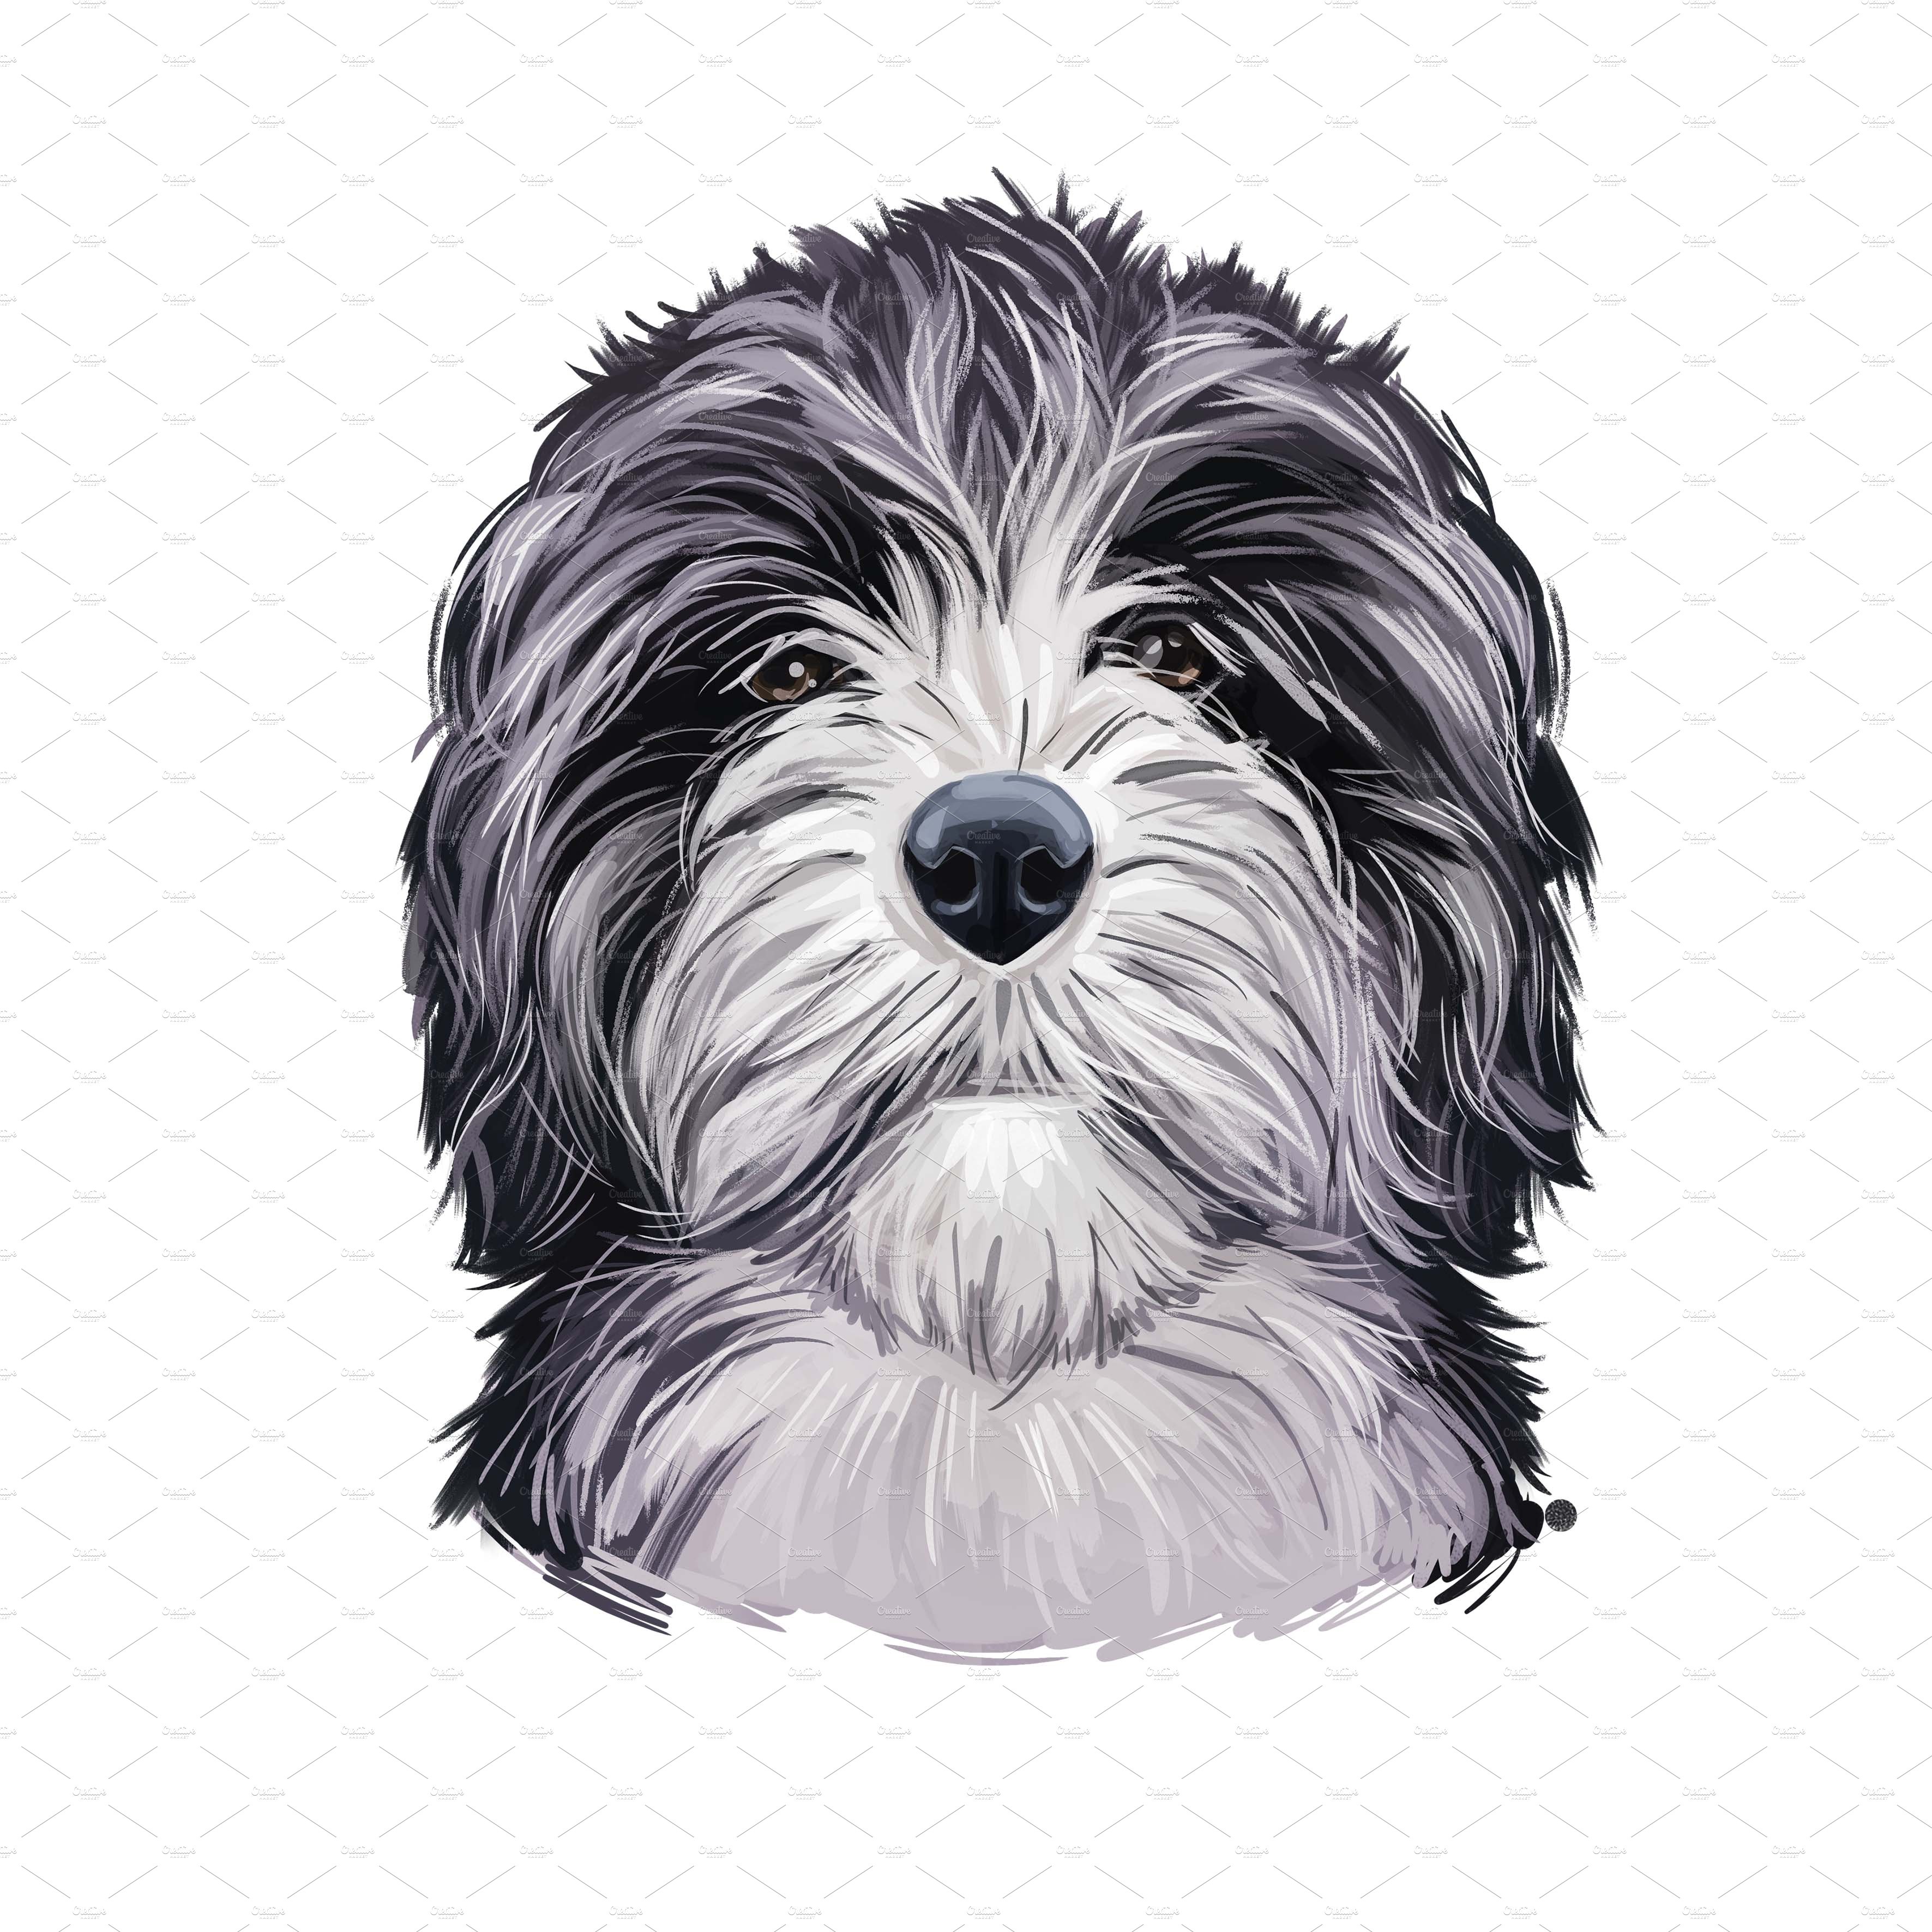 29. doxiepoo dog png 28229 605